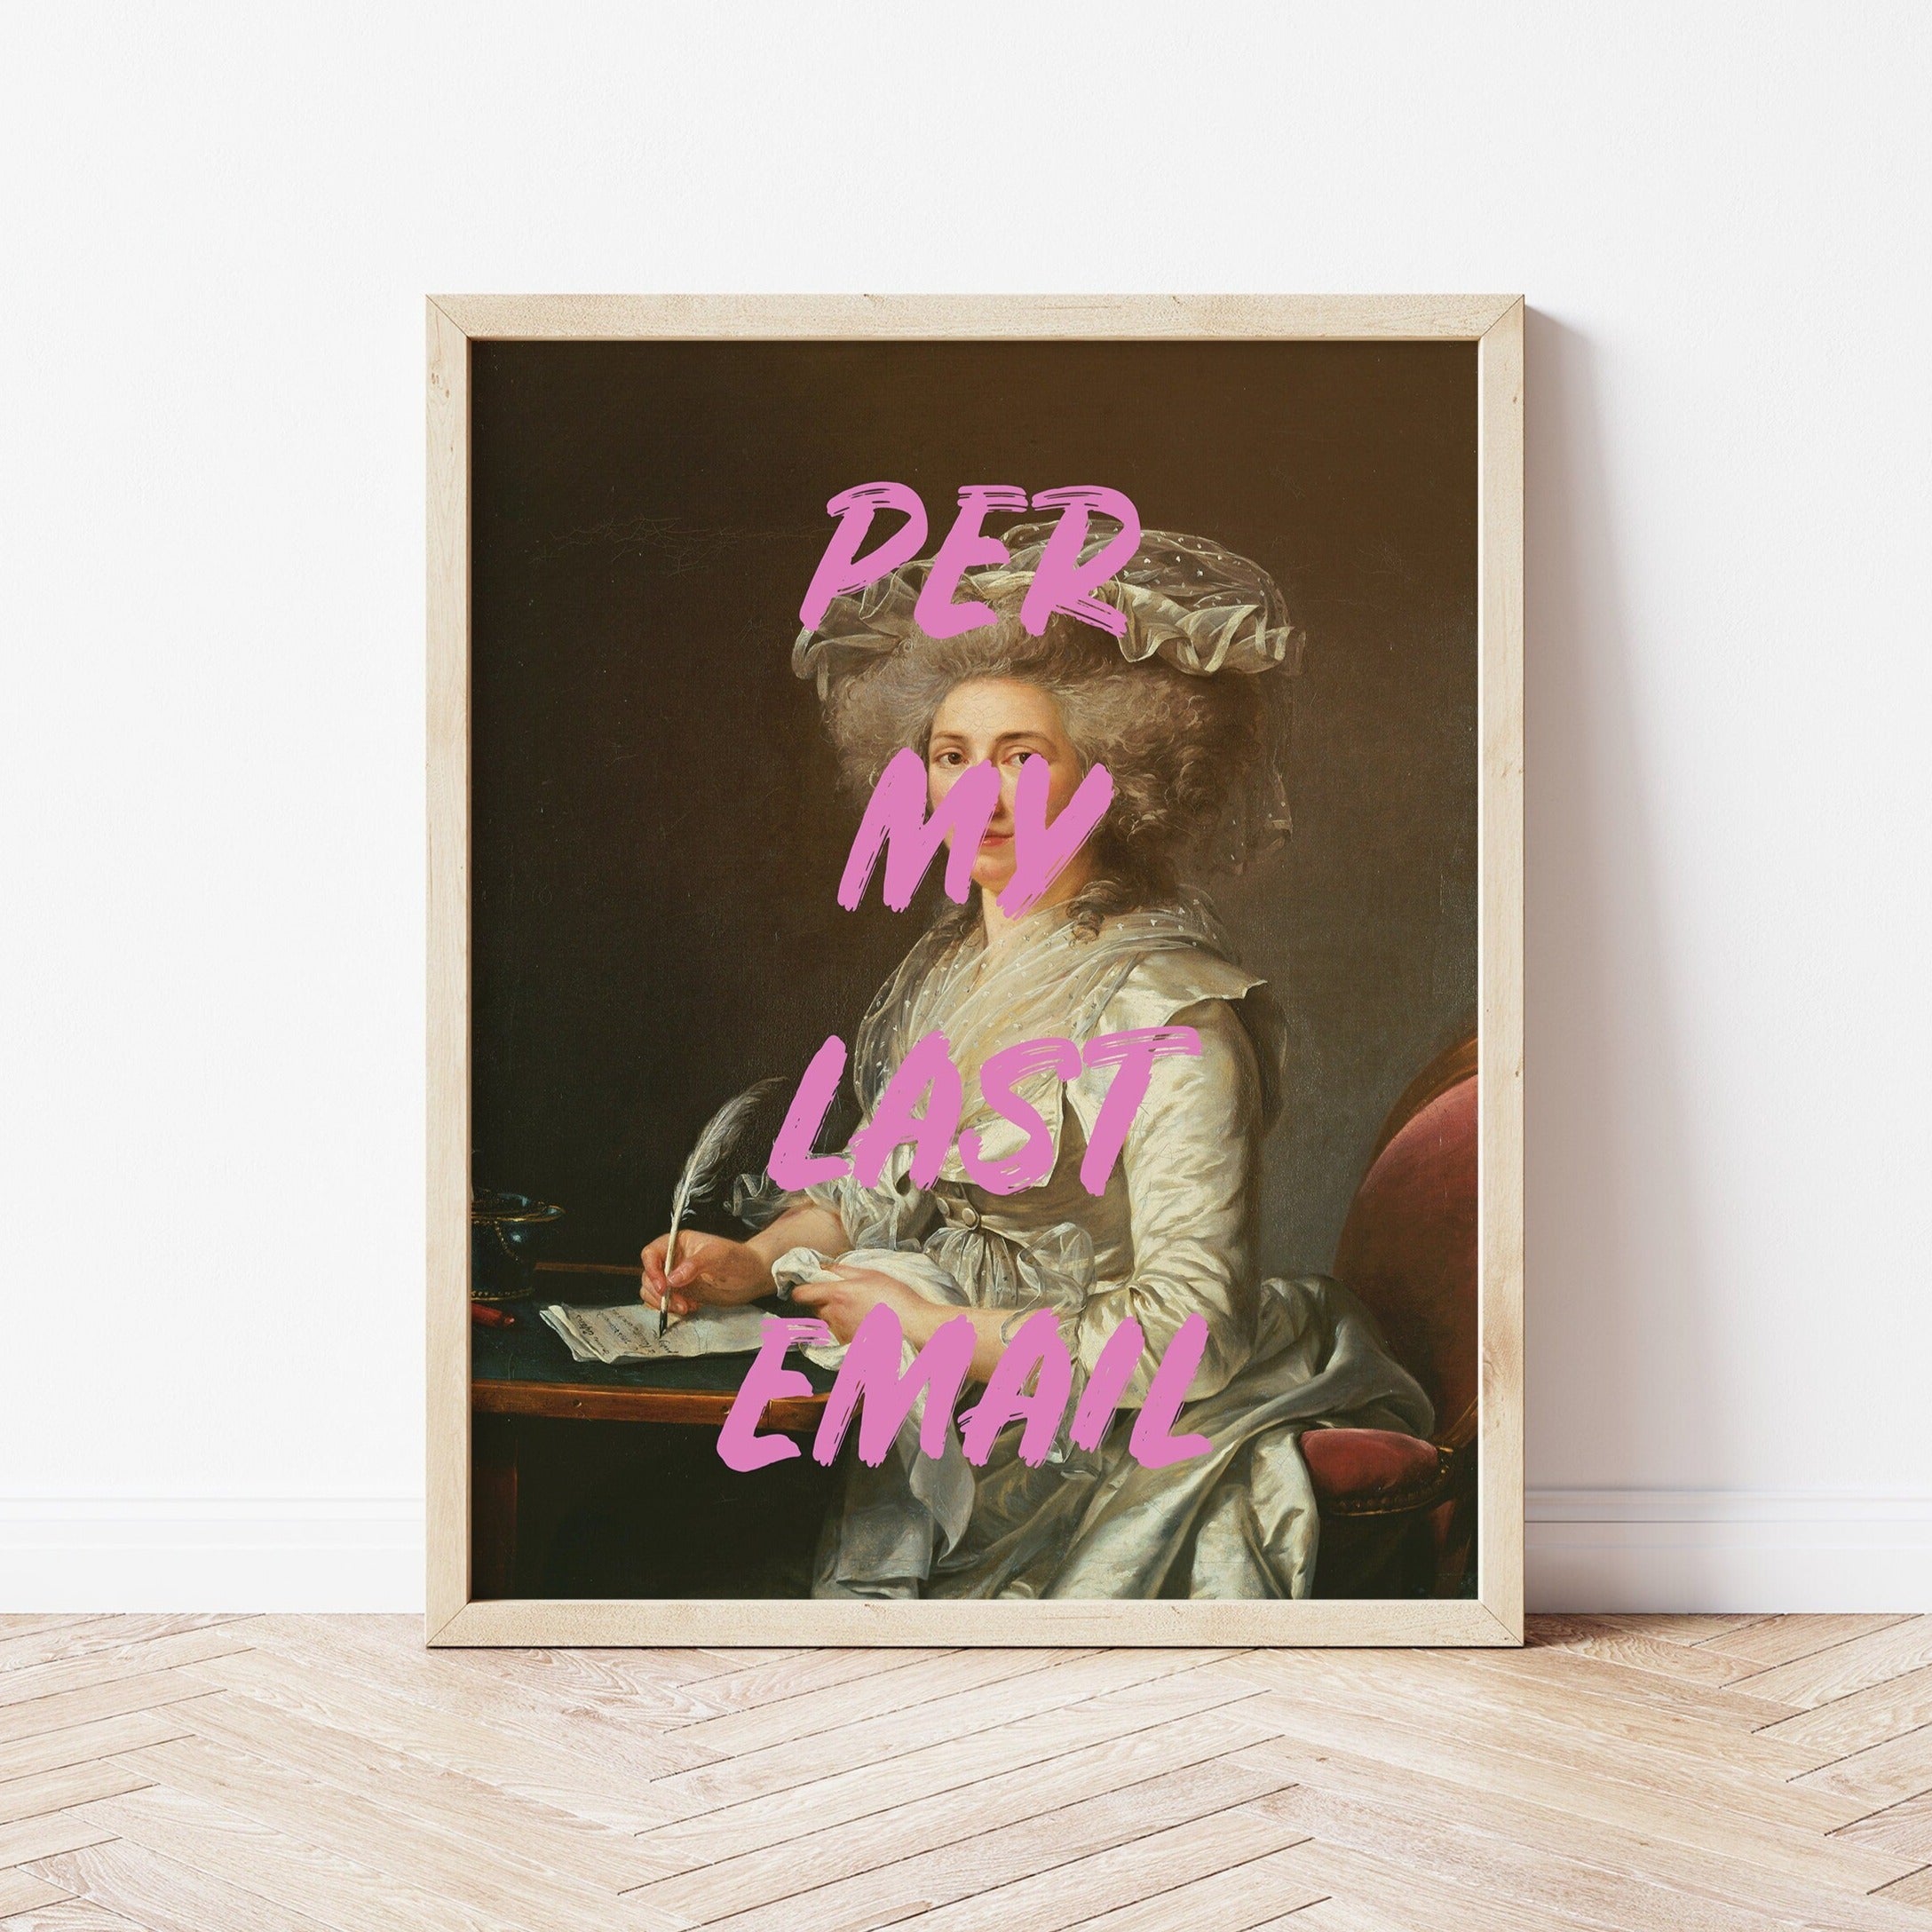 Home Office Wall Art, Per My Last Email Poster, Classical Art Renaissance Painting Art Print, Typography Art, UNFRAMED